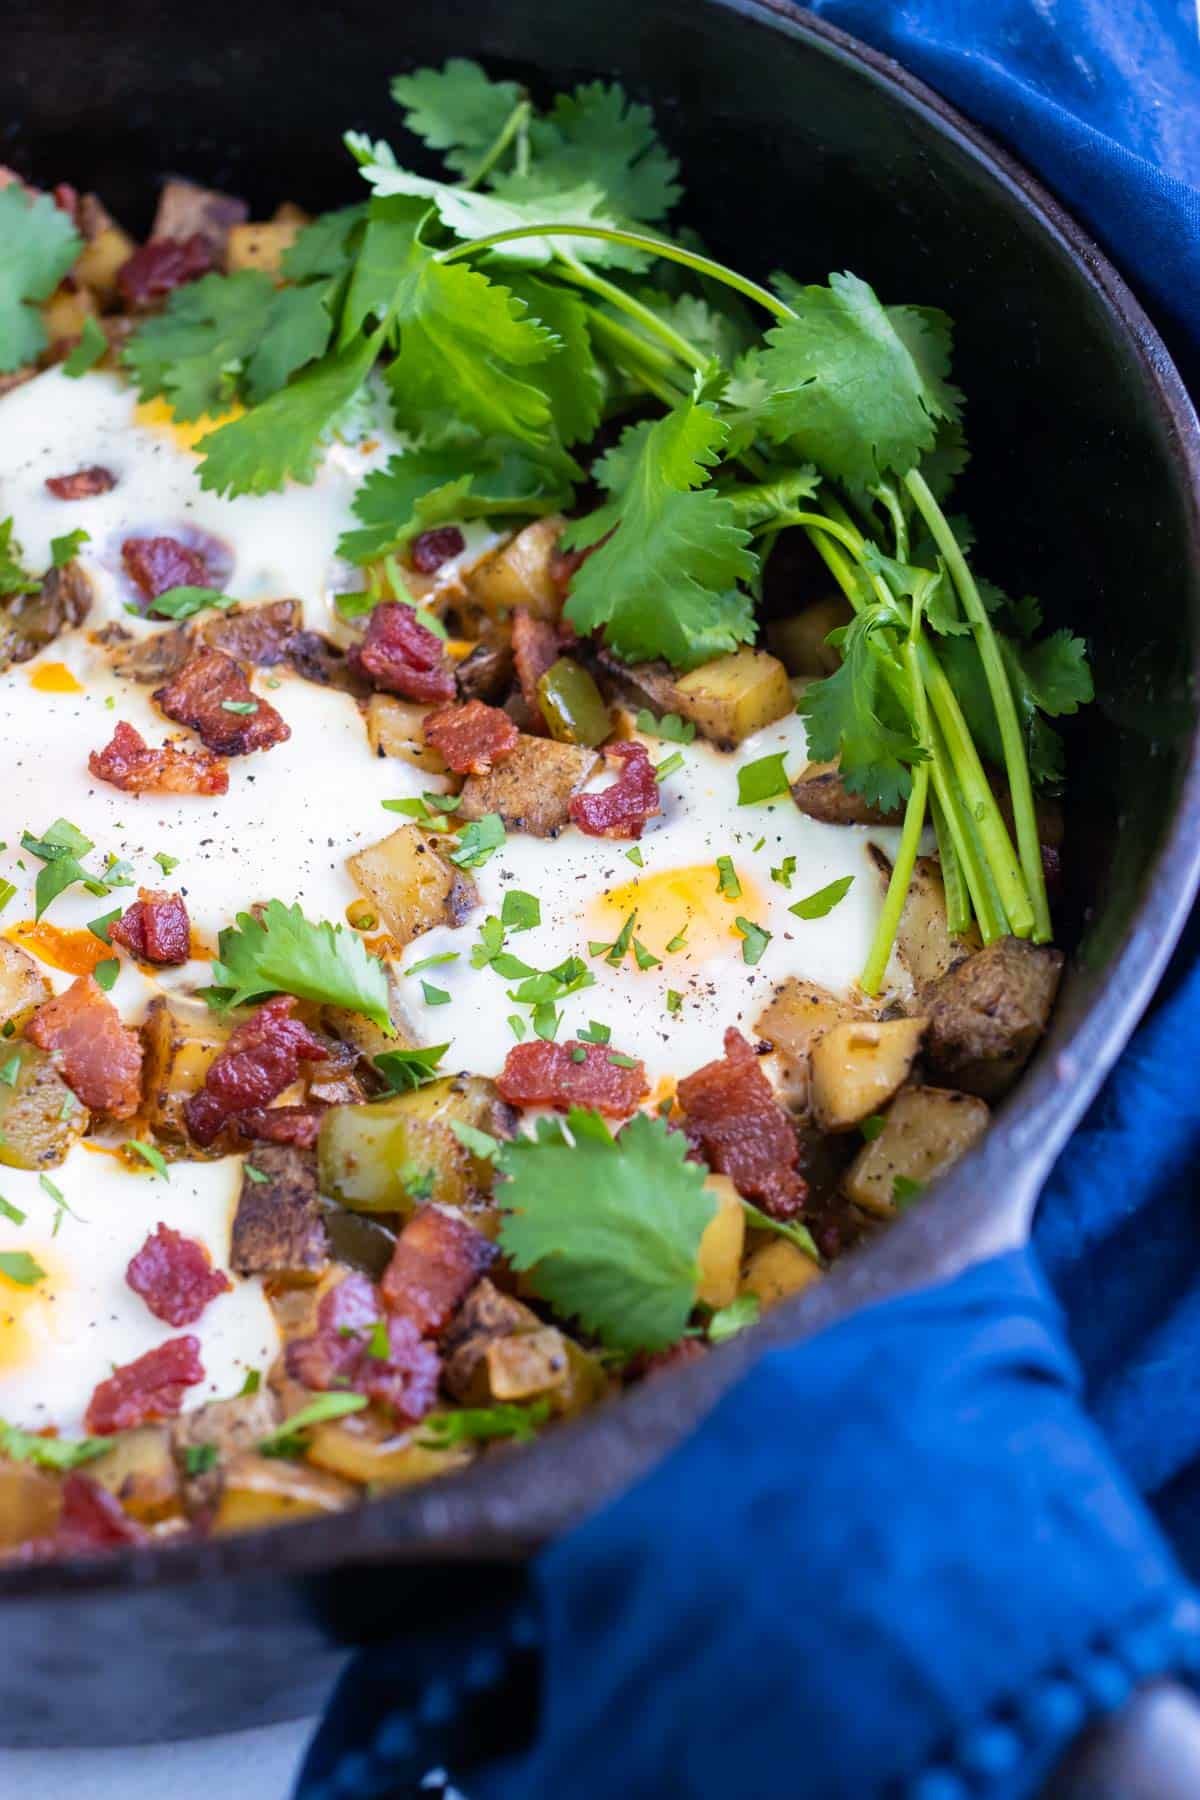 Breakfast hash with eggs is garnished with fresh cilantro or parsley.